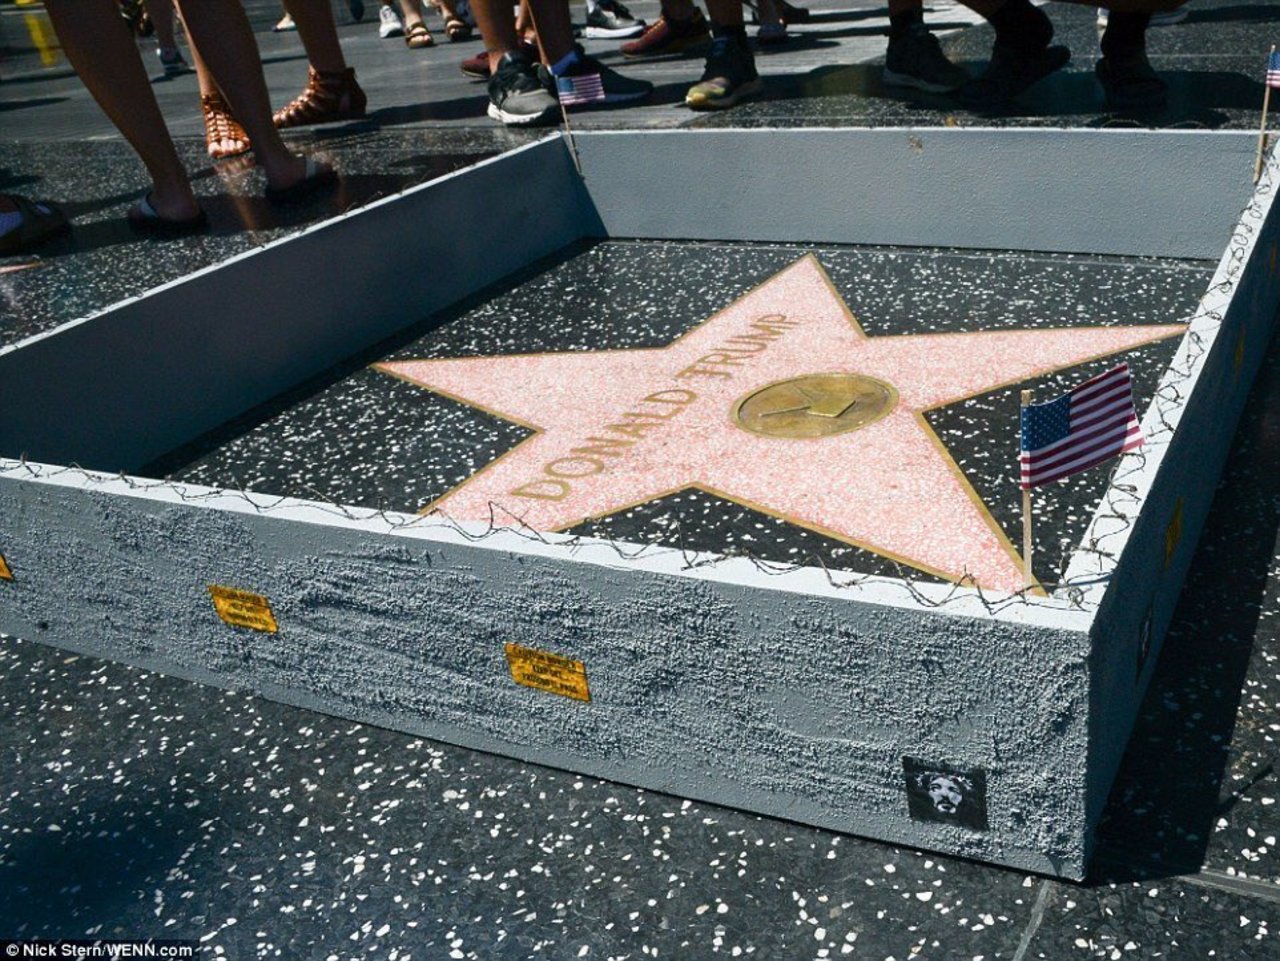 There's now a wall with barbed wire & US flags around @realDonaldTrump's star on Hollywood Walk of Fame #streetart https://t.co/JO53pcLVil